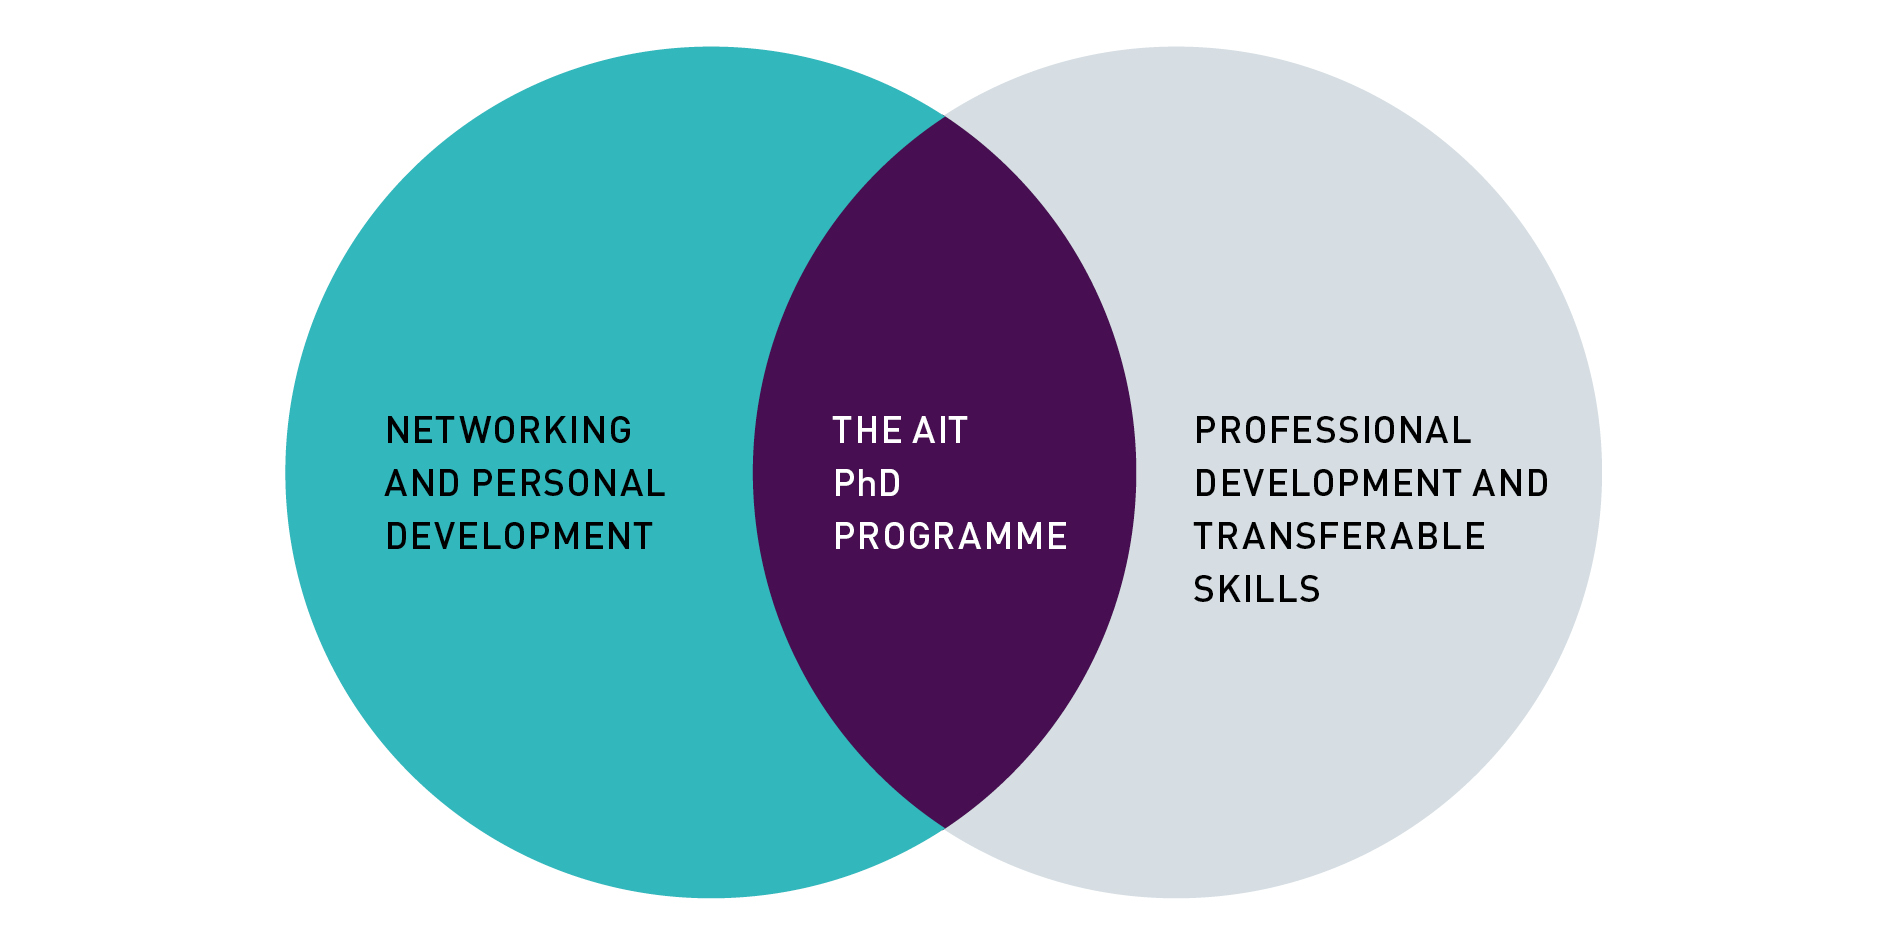 An infographic with two overlapping circles: on the left is "networking and personal development". In the middle is "The AIT PhD Program" and on the right is "professional development and transferable skills".